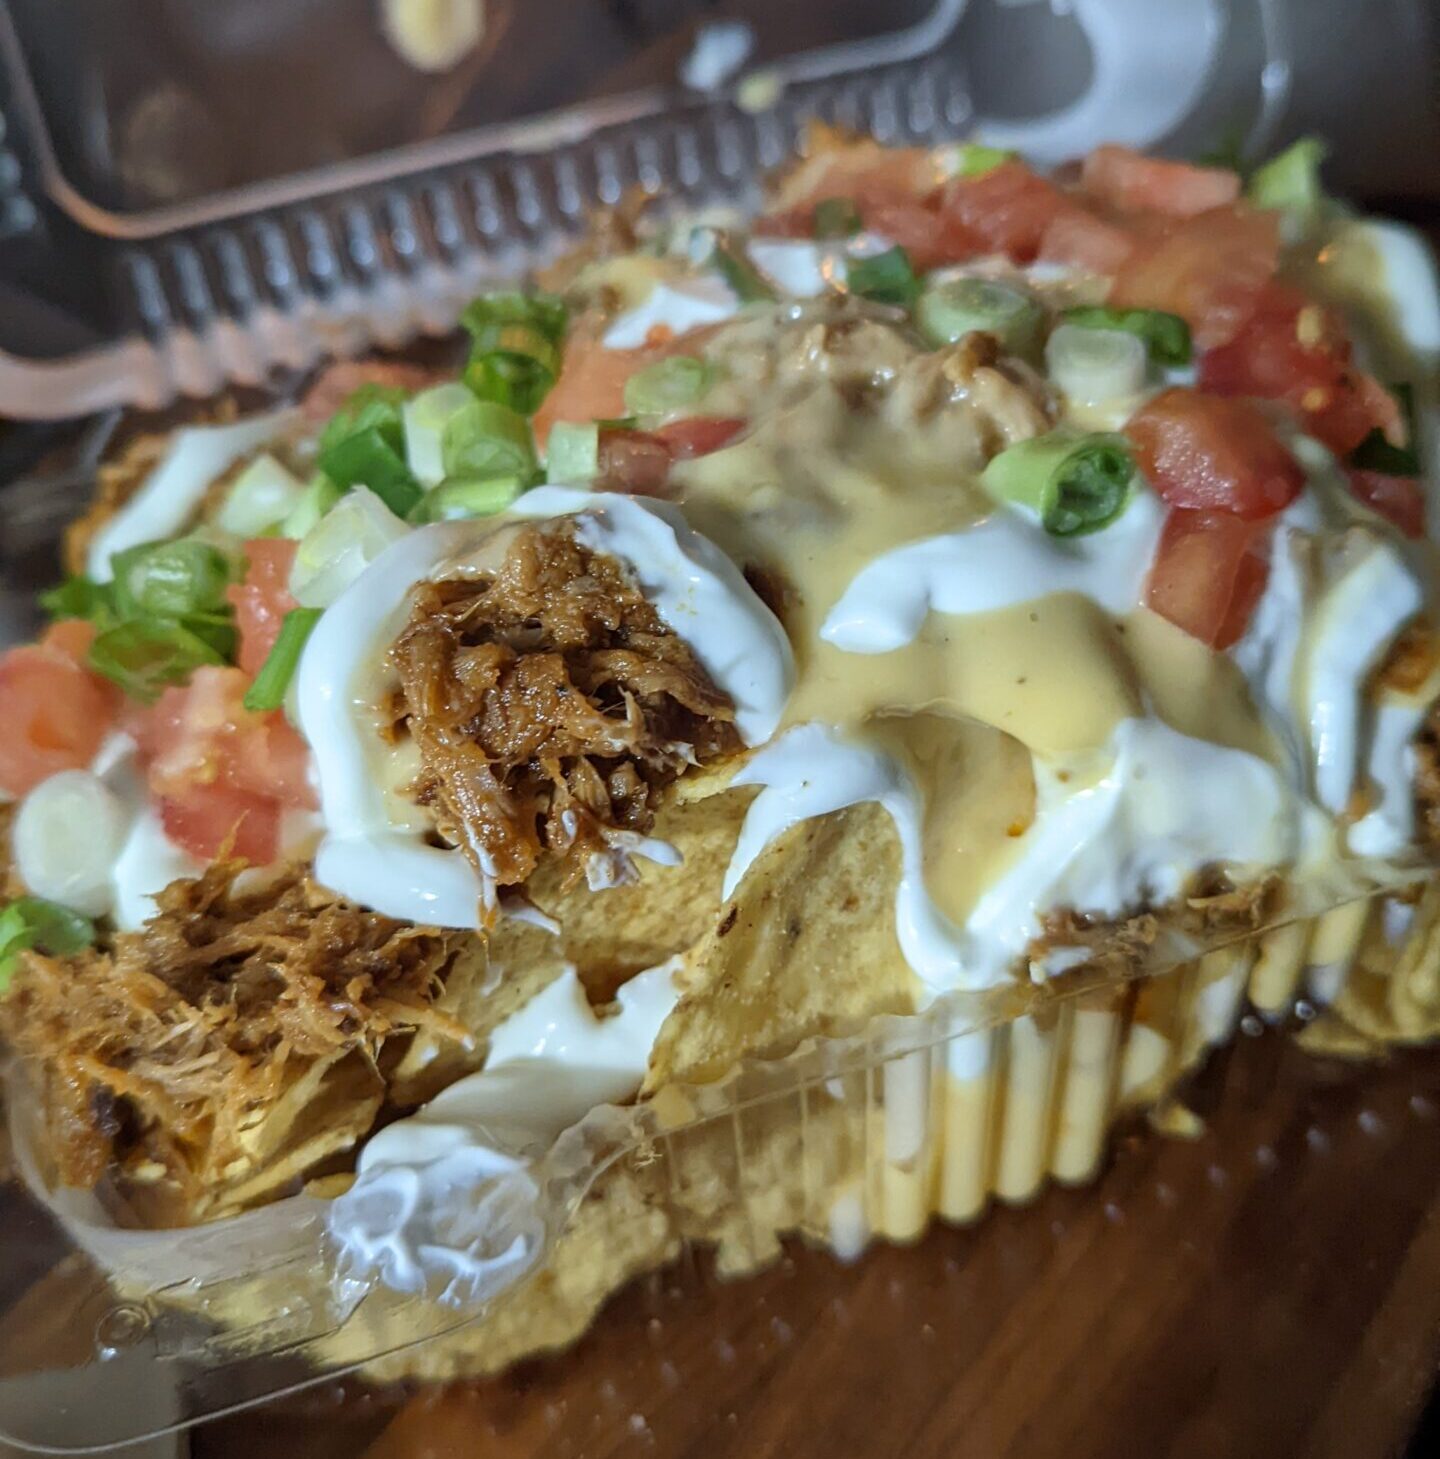 Pulled pork nachos from Smashed Apple Catering Co. in Windsor, Ontario.